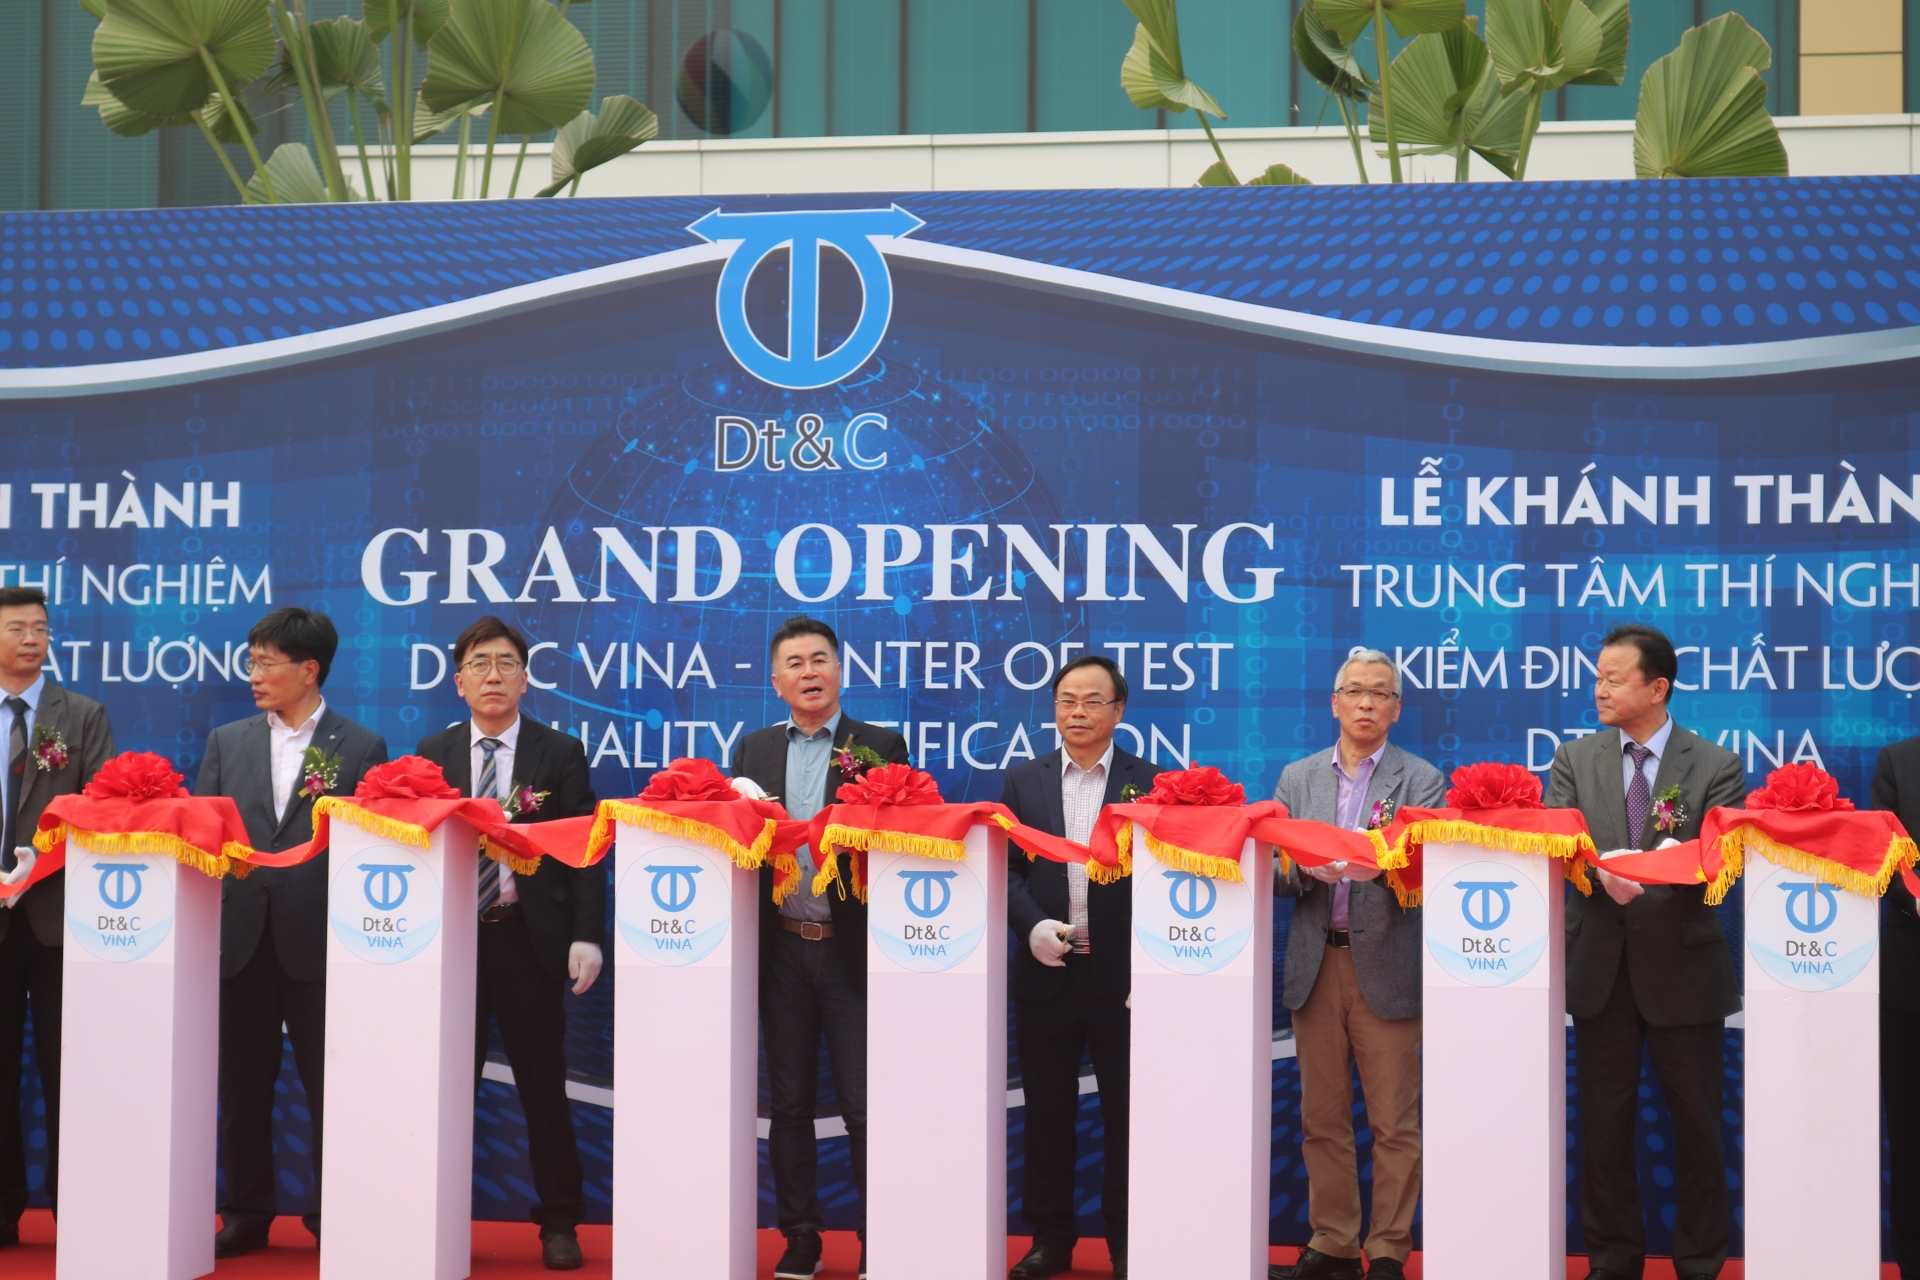 Leading testing and quality certification firm enters Vietnam